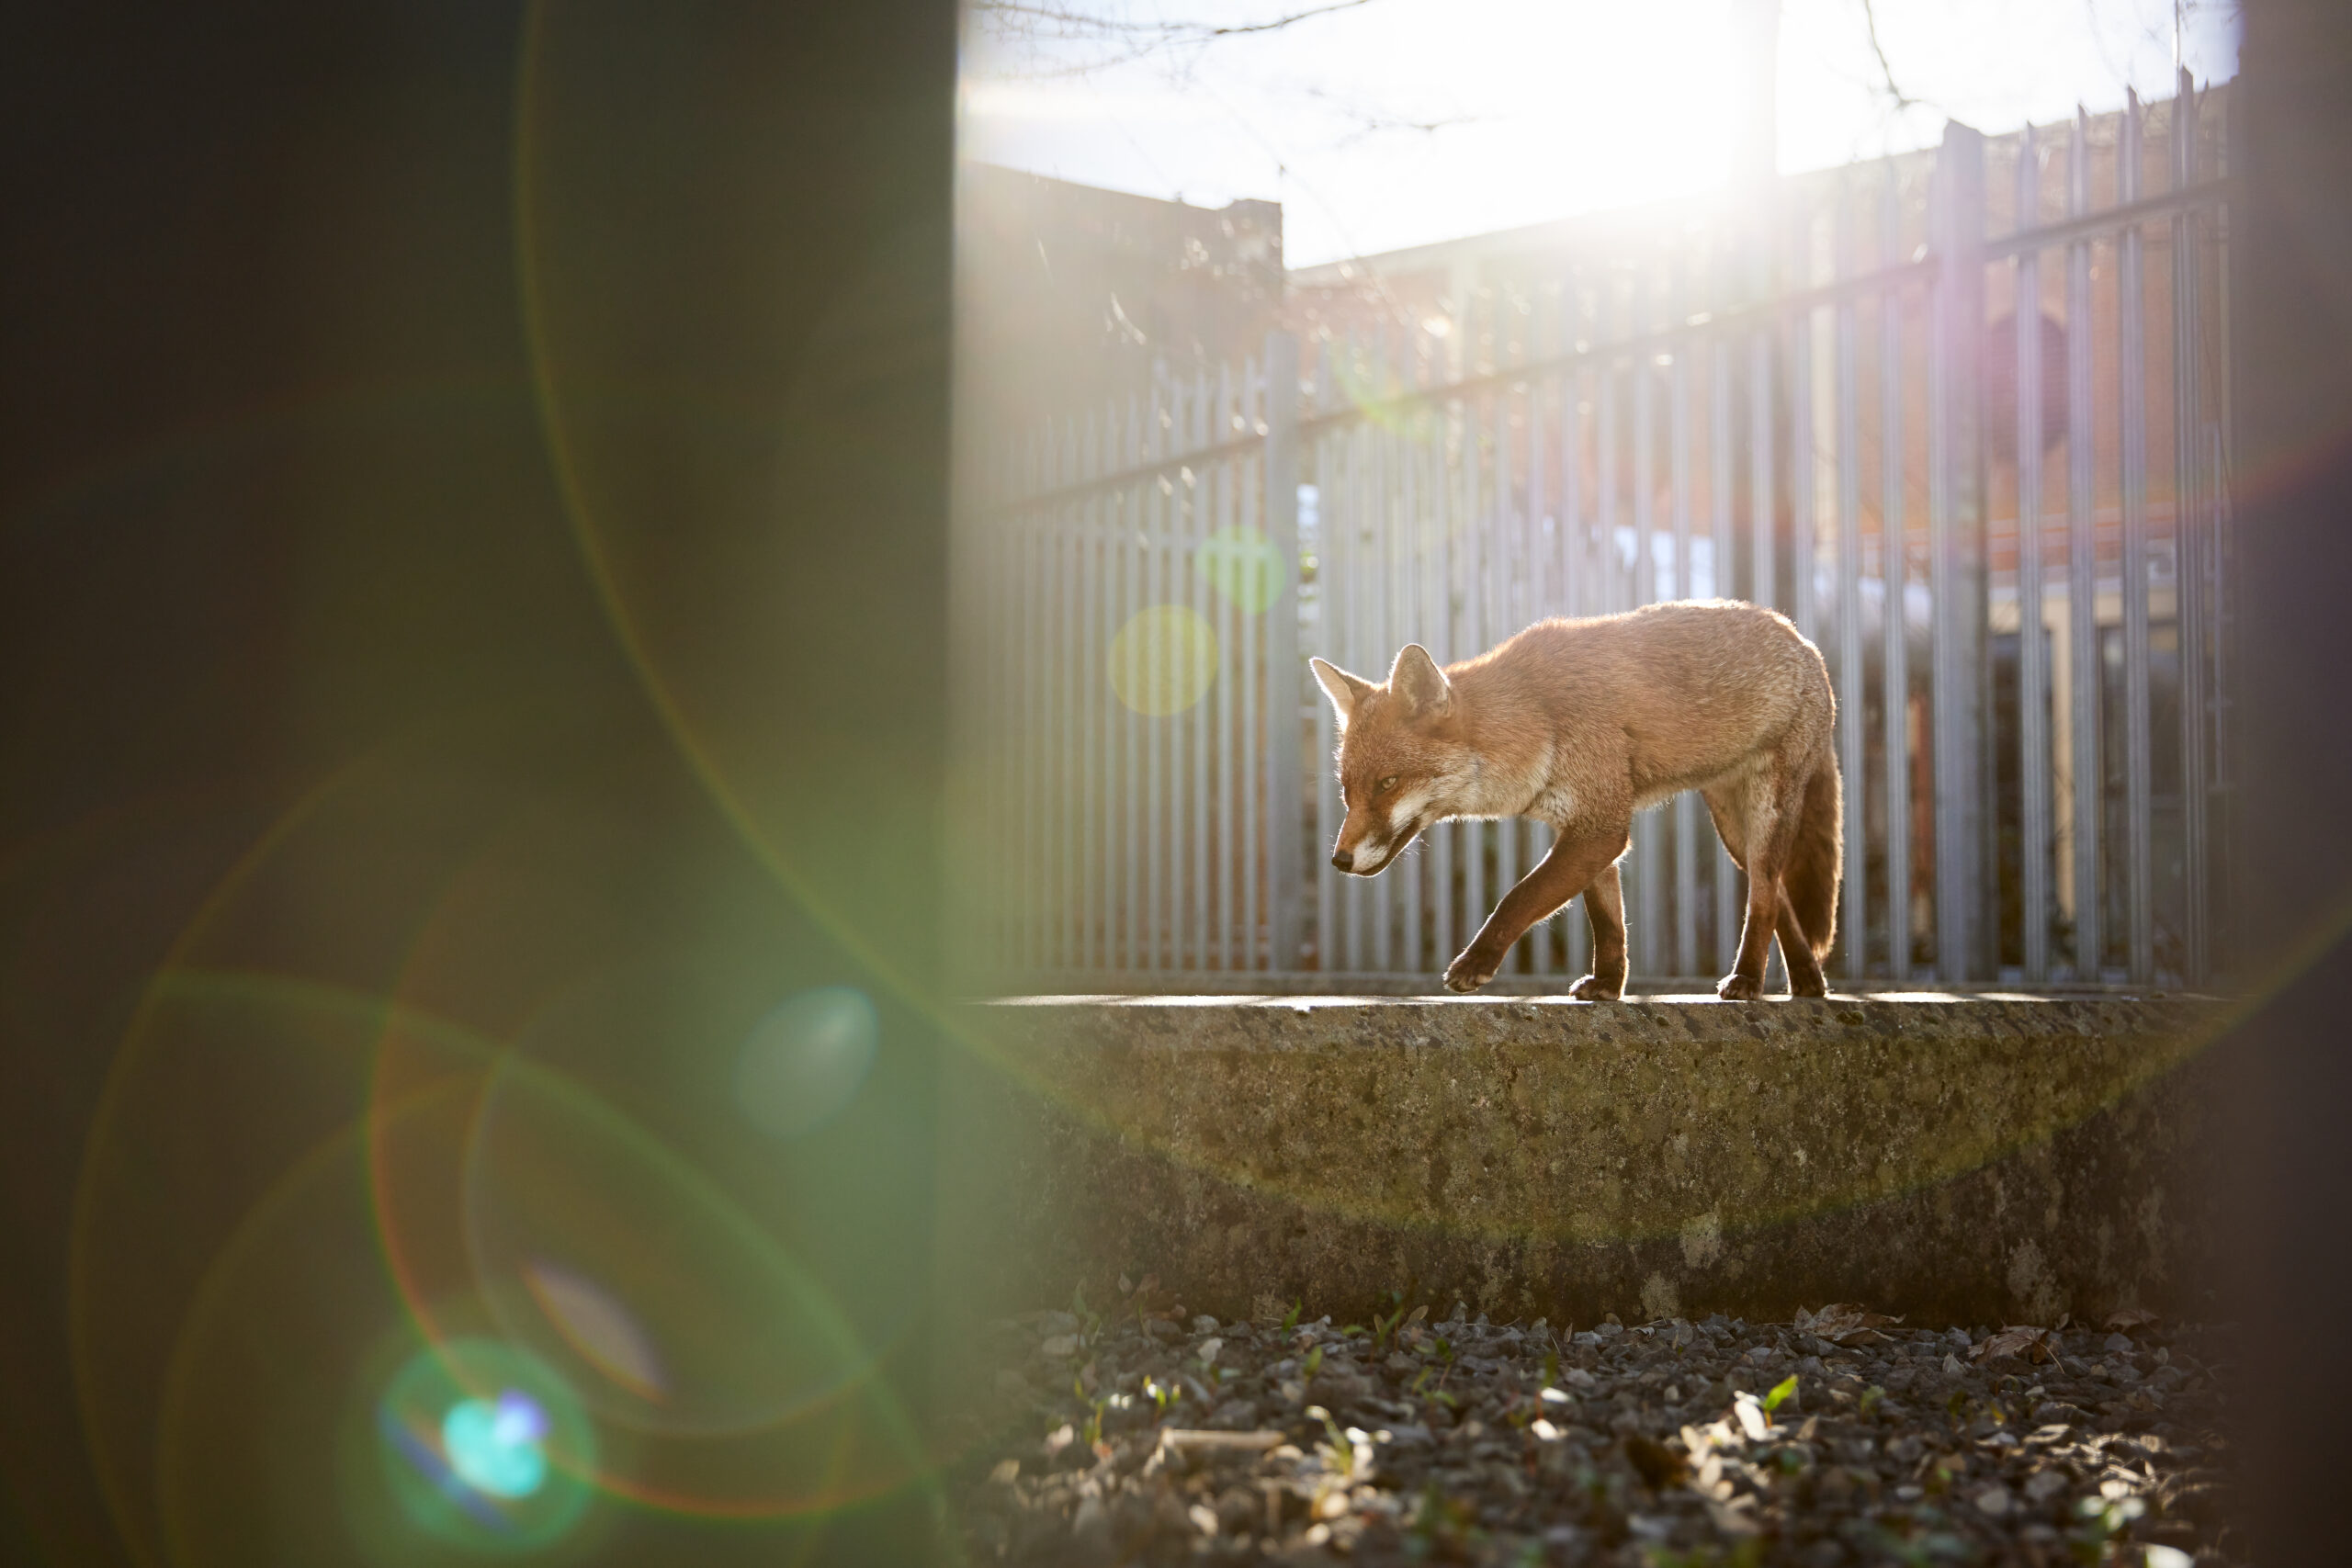 a fox walks along a low cement wall backdropped by a metal fence in the late afternoon light. It is unaware of the photographer